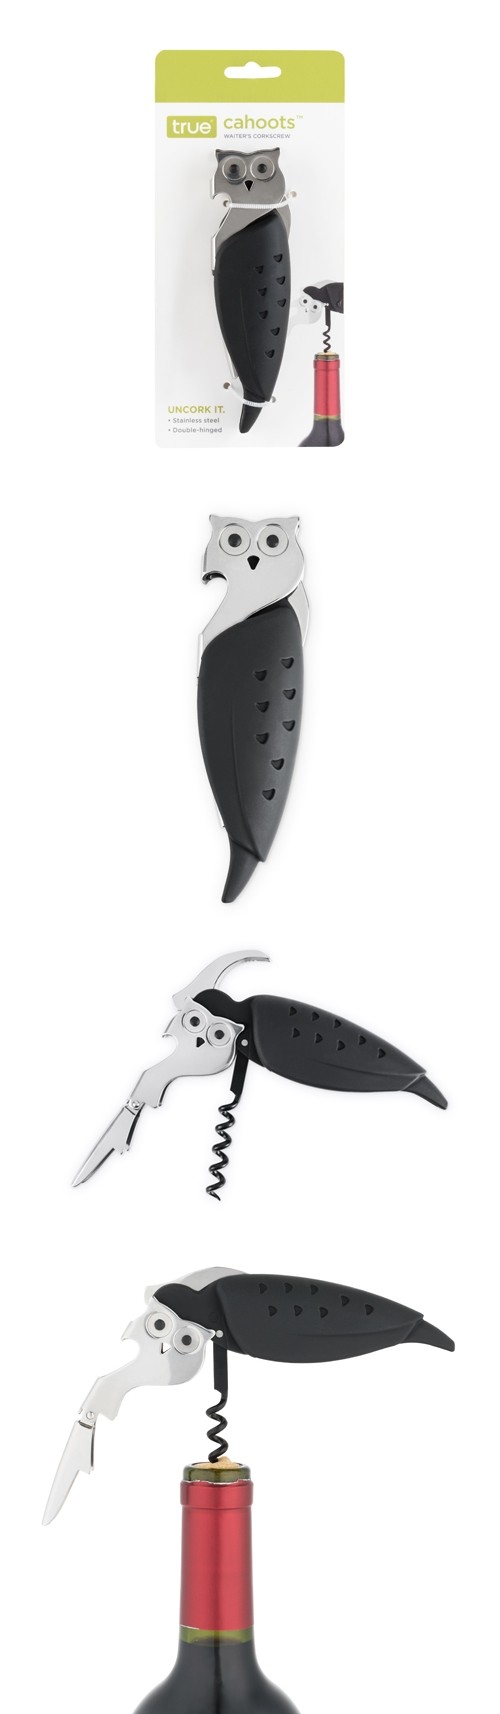 Cahoots Owl Soft-Touch & Stainless-Steel Waiter's Corkscrew by True